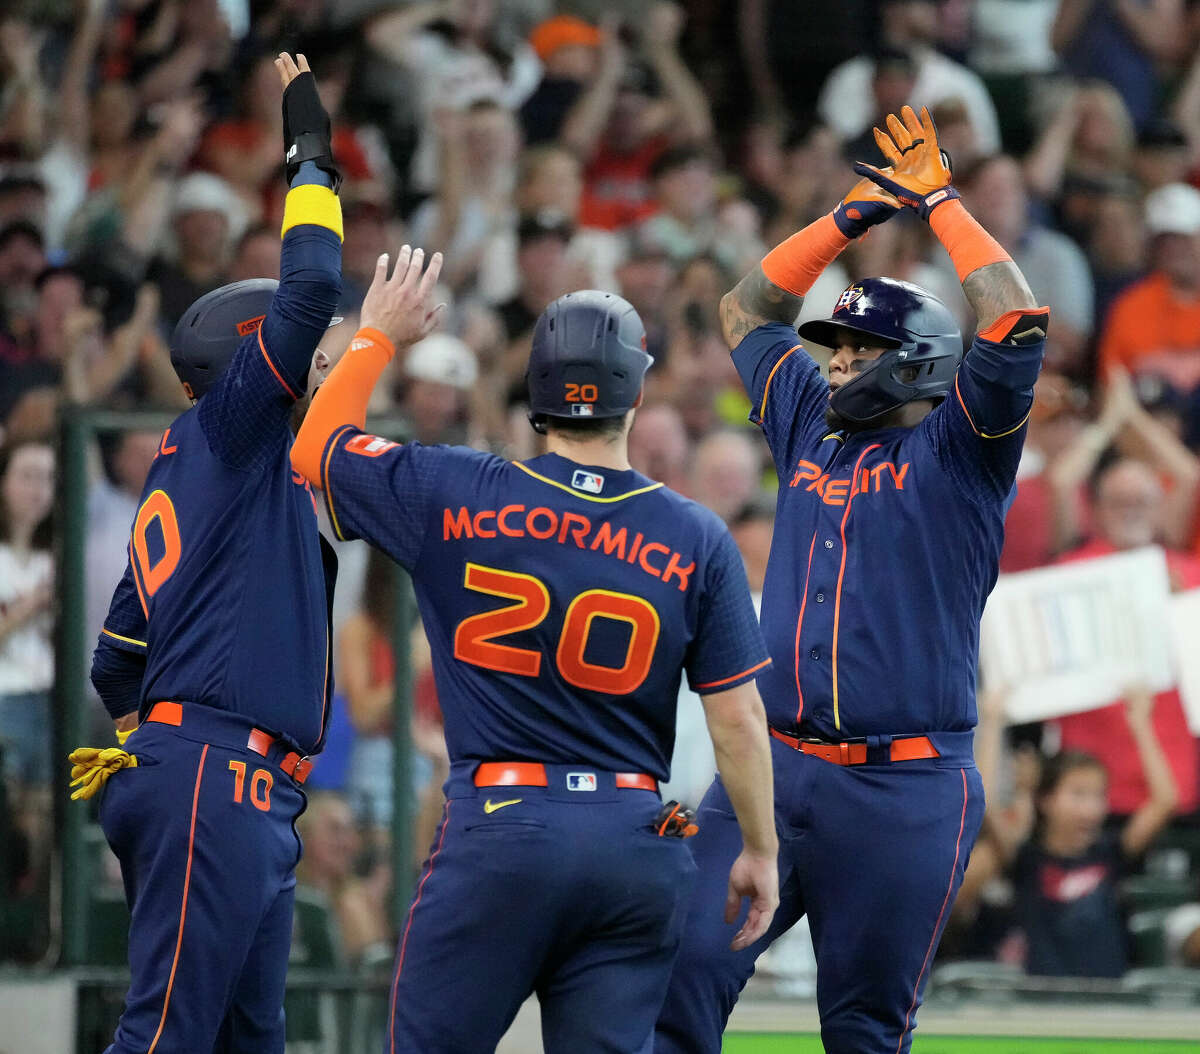 Houston Astros' Martin Maldonado (15) celebrates with Chas McCormick (20) and Yuli Gurriel (10) after hitting a grand slam off of Oakland Athletics starting pitcher Jared Koenig (46) during the second inning of a MLB baseball game at Minute Maid Park on Saturday, July 16, 2022 in Houston.